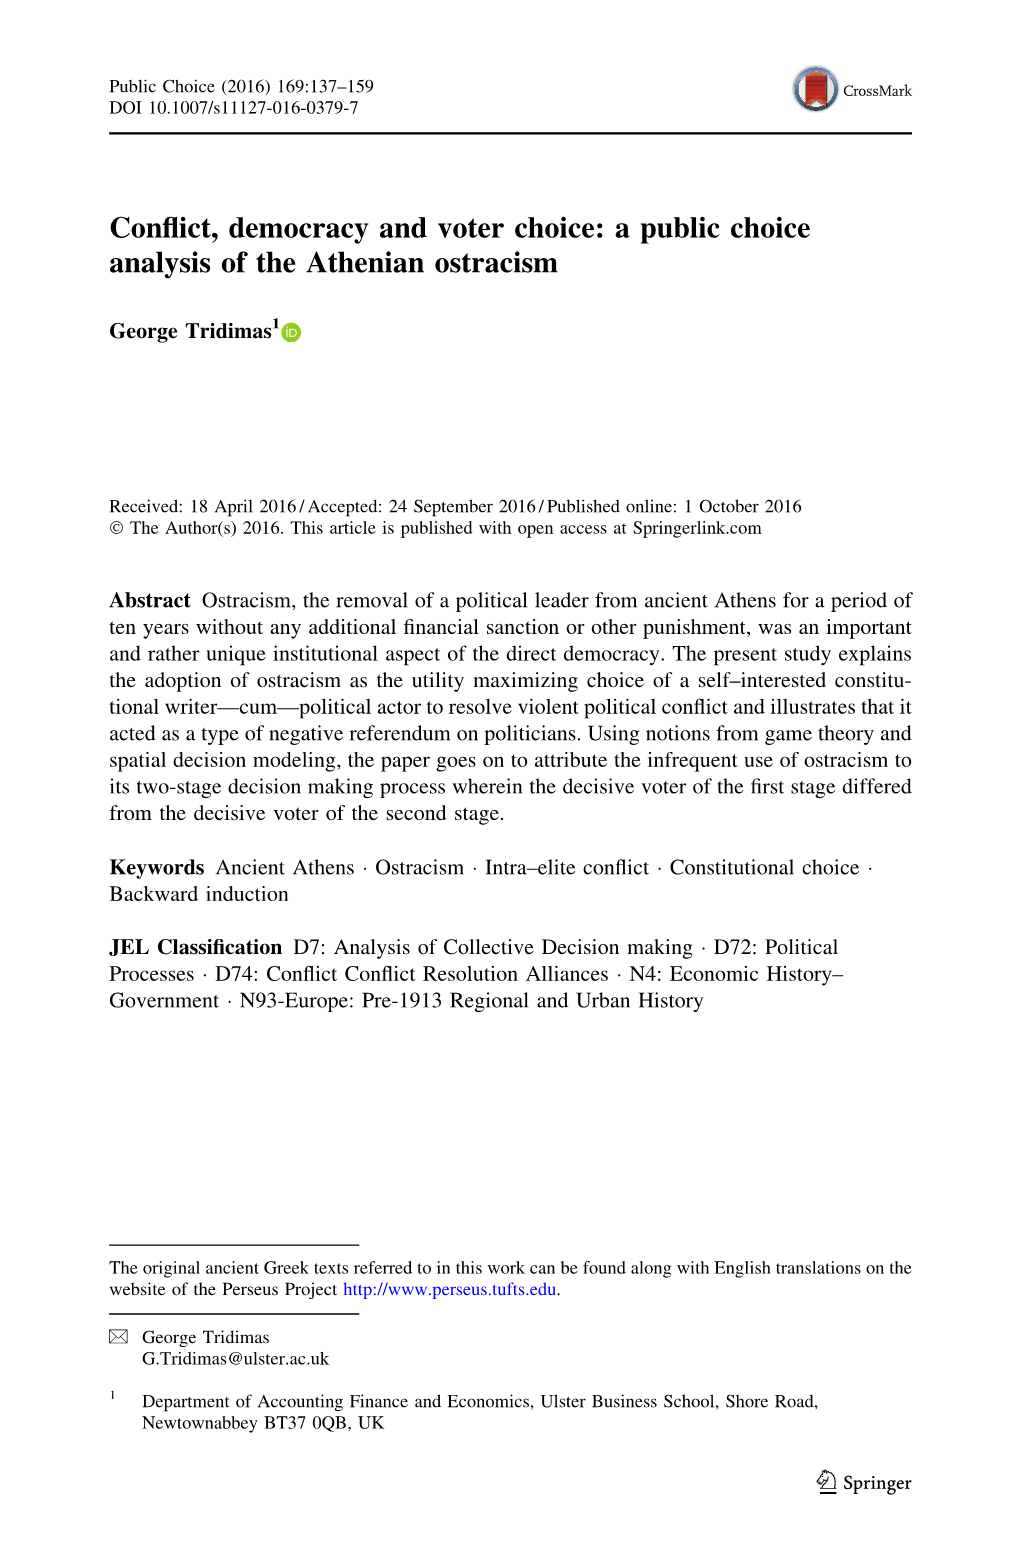 Conflict, Democracy and Voter Choice: a Public Choice Analysis of The